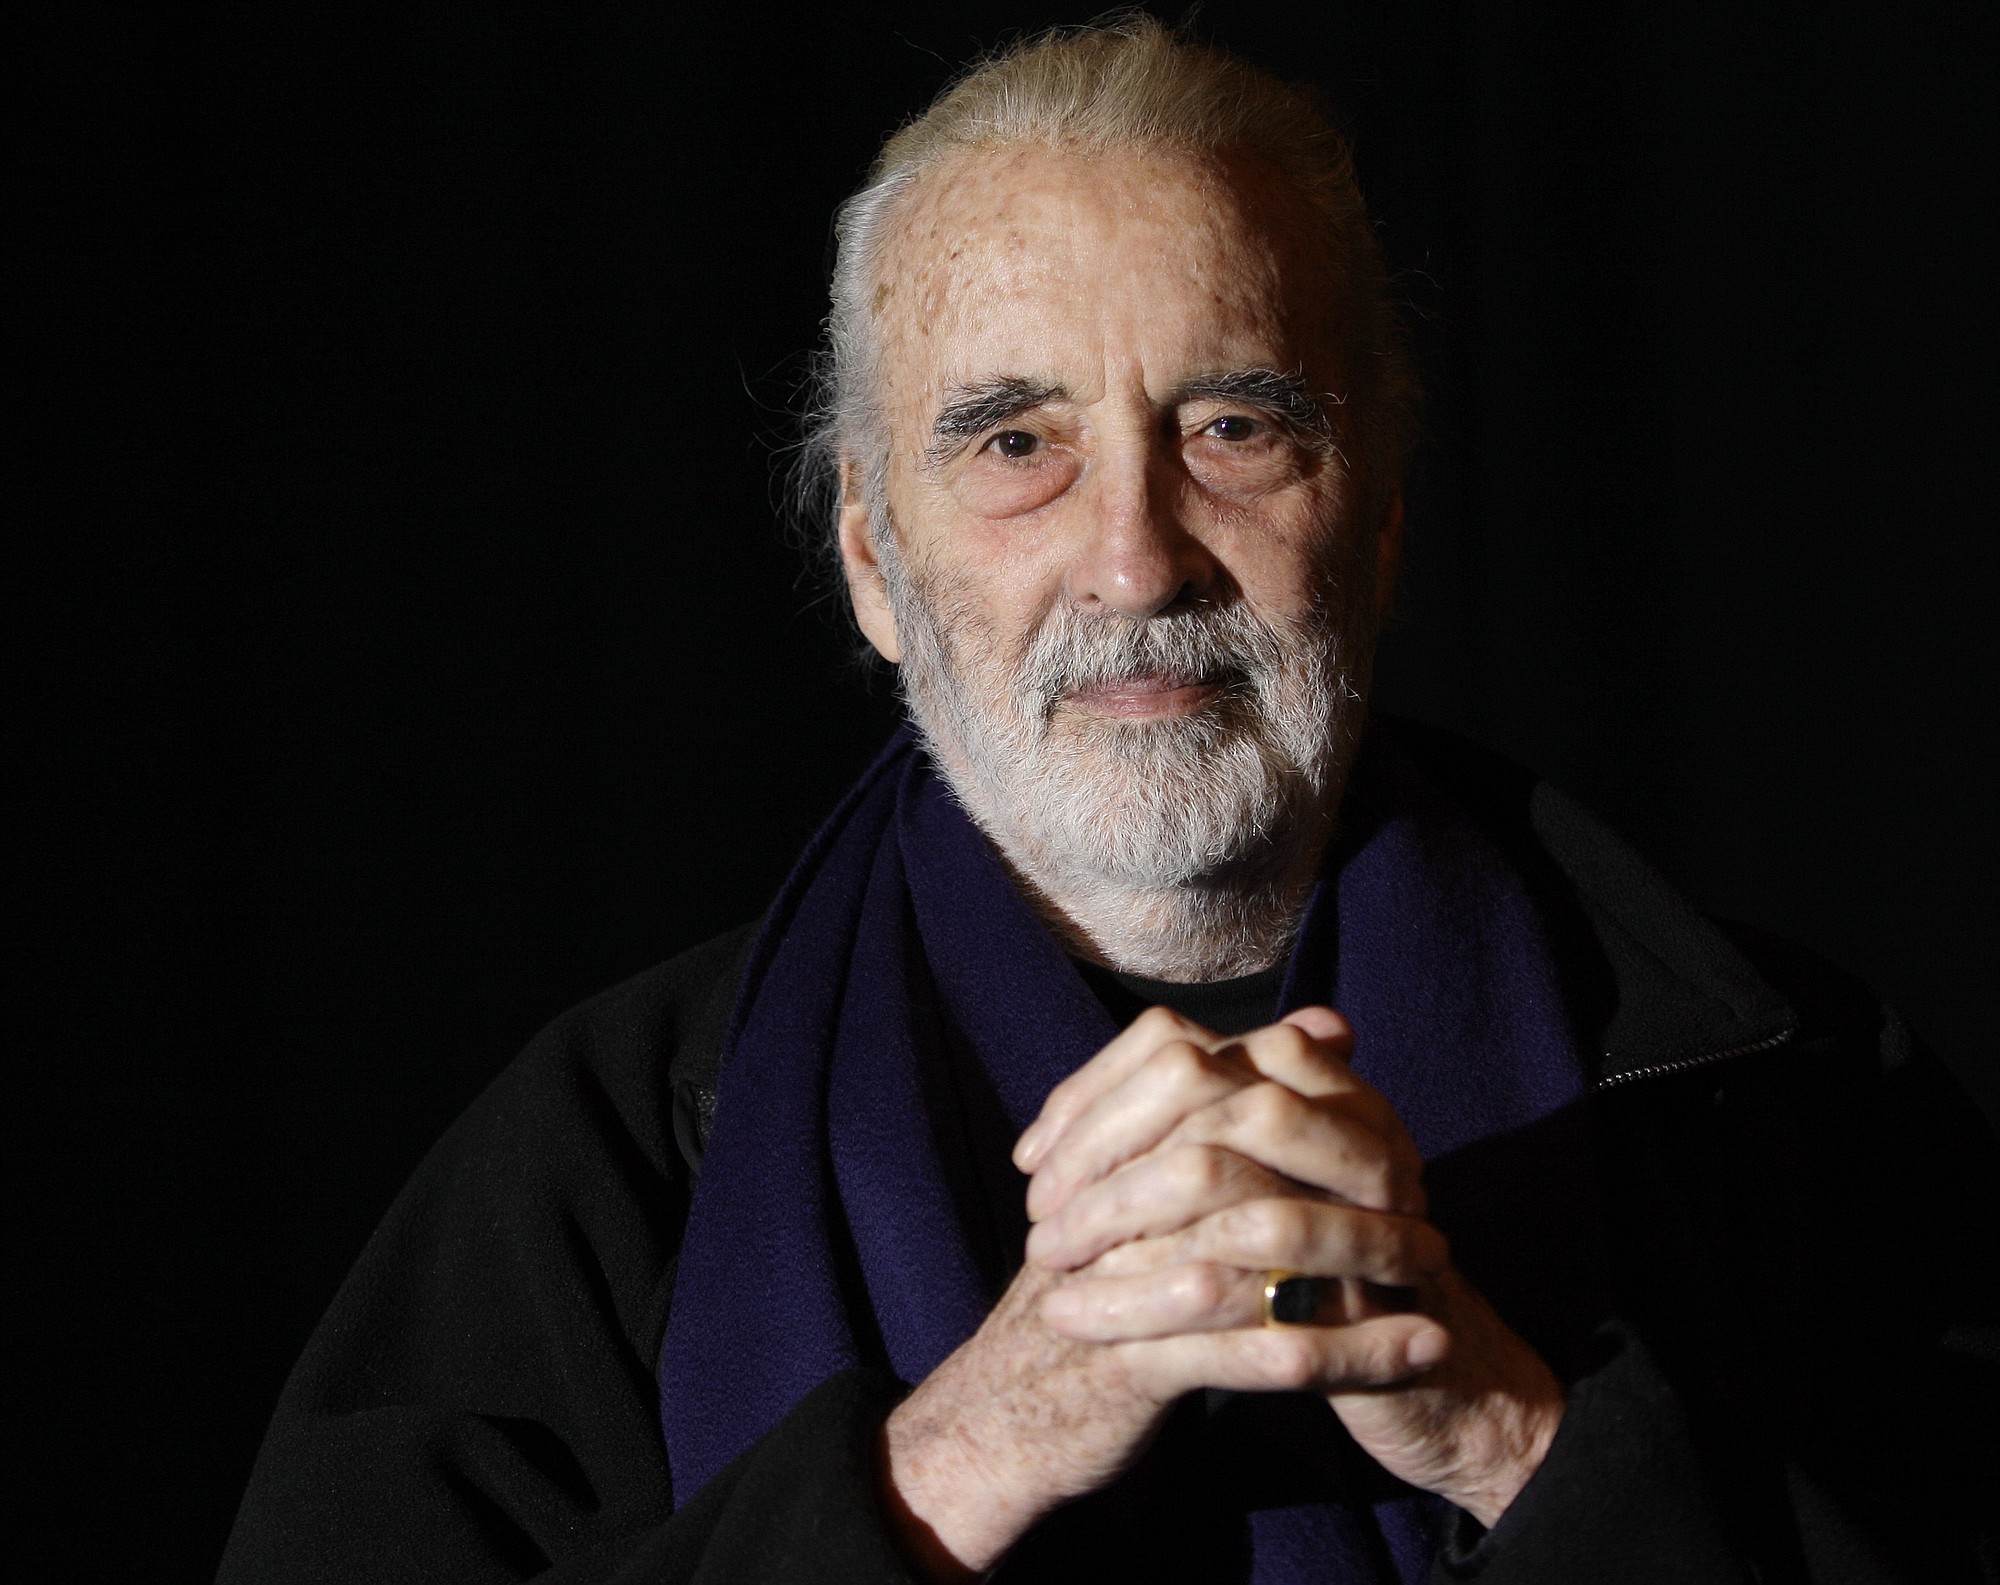 British actor Sir Christopher Lee has died at age 93, the Royal Borough of Kensington and Chelsea in London confirmed a death certificate was issued for Lee on June 8.